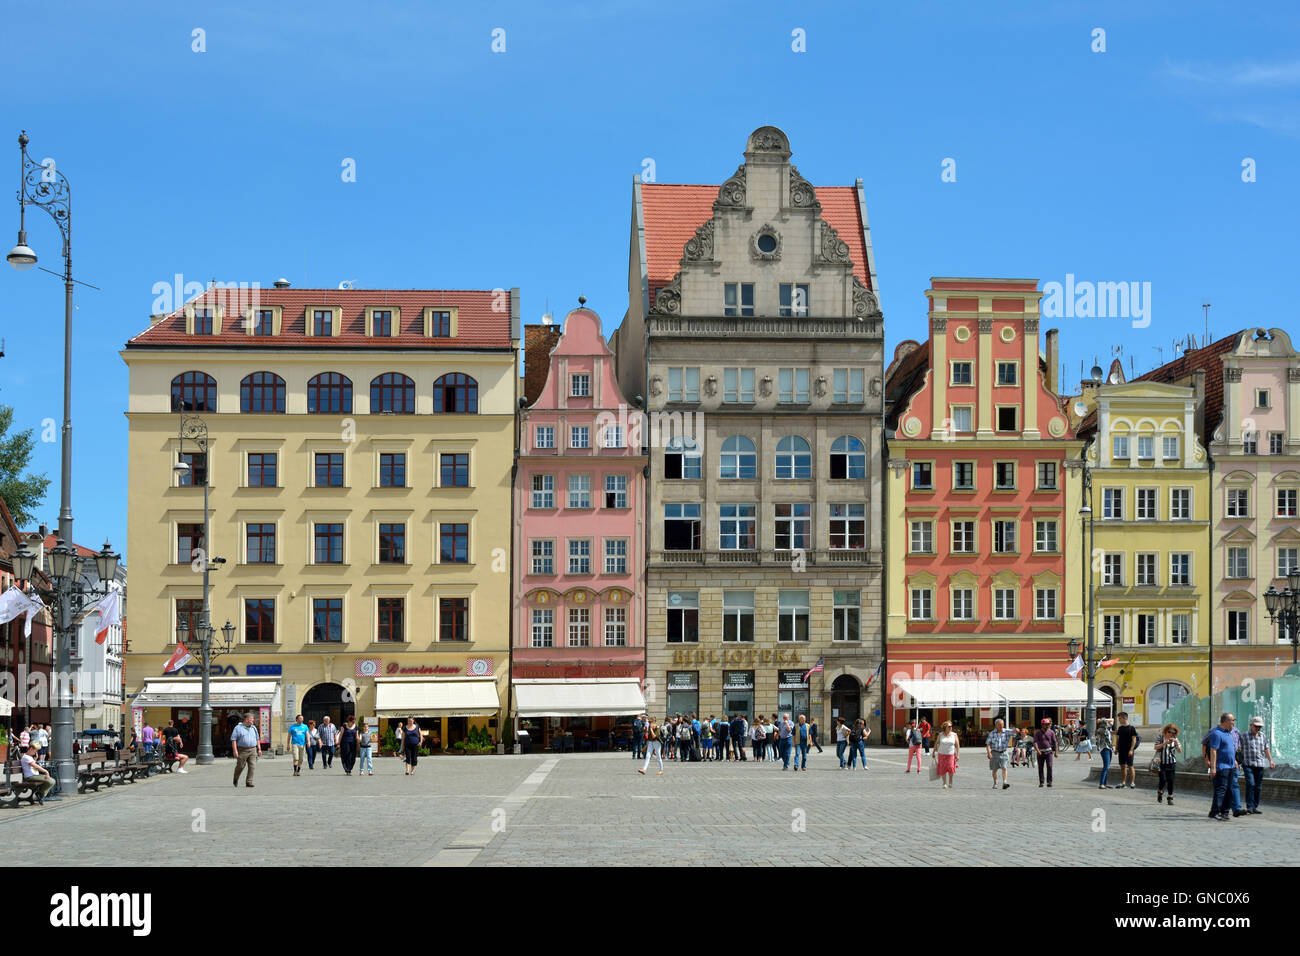 People of the Market Square in the Old Town of Wroclaw in Poland. Stock Photo